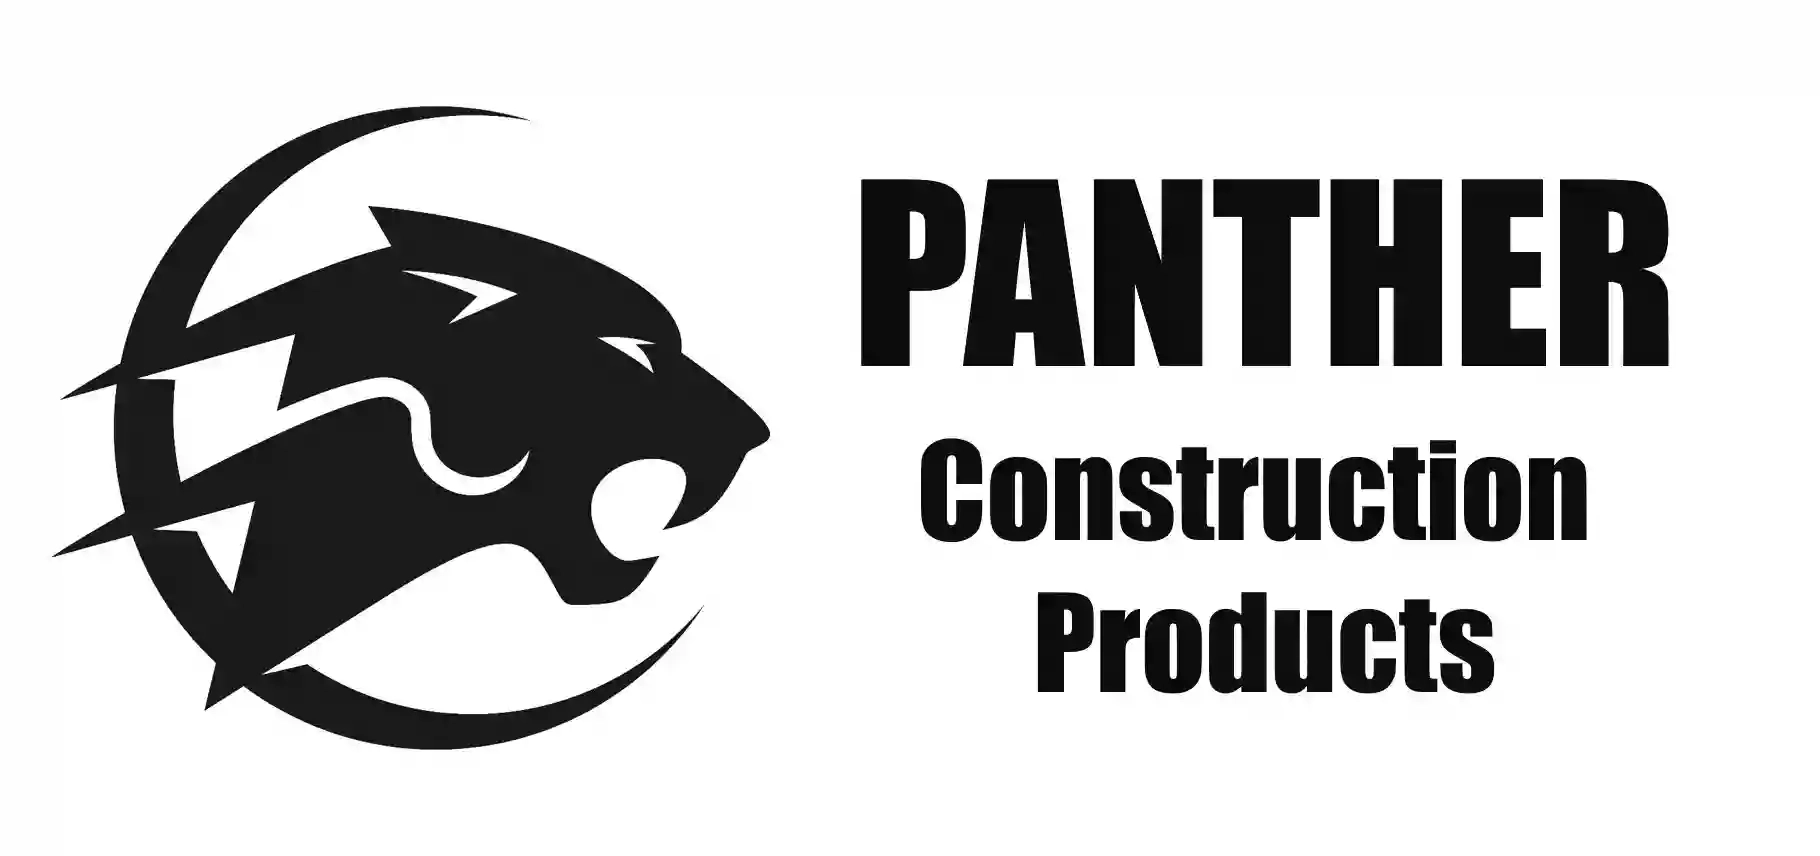 Panther Construction Products Limited